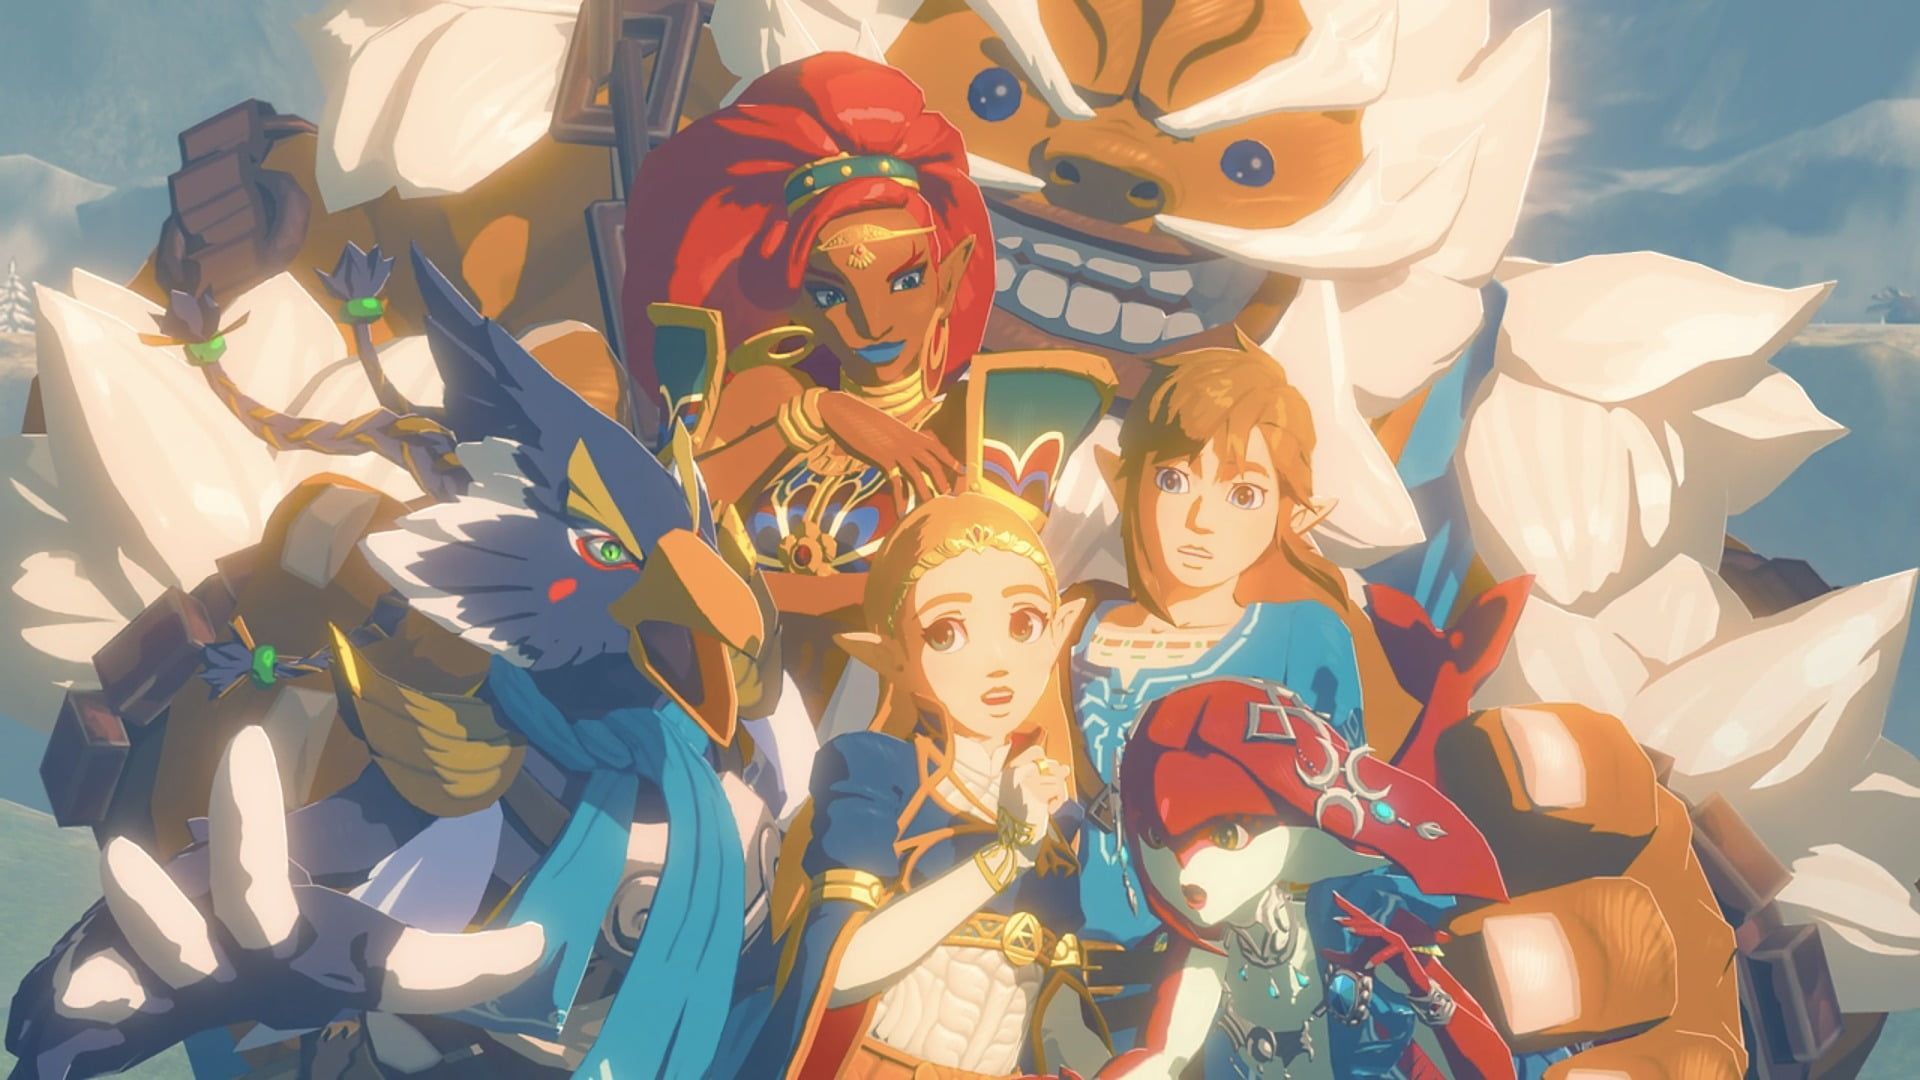 Anime Character wallpaper #botw The Legend of Zelda: Breath of the Wild The Champions' Ballad #Mipha The L. Legend of zelda, Character wallpaper, Anime characters